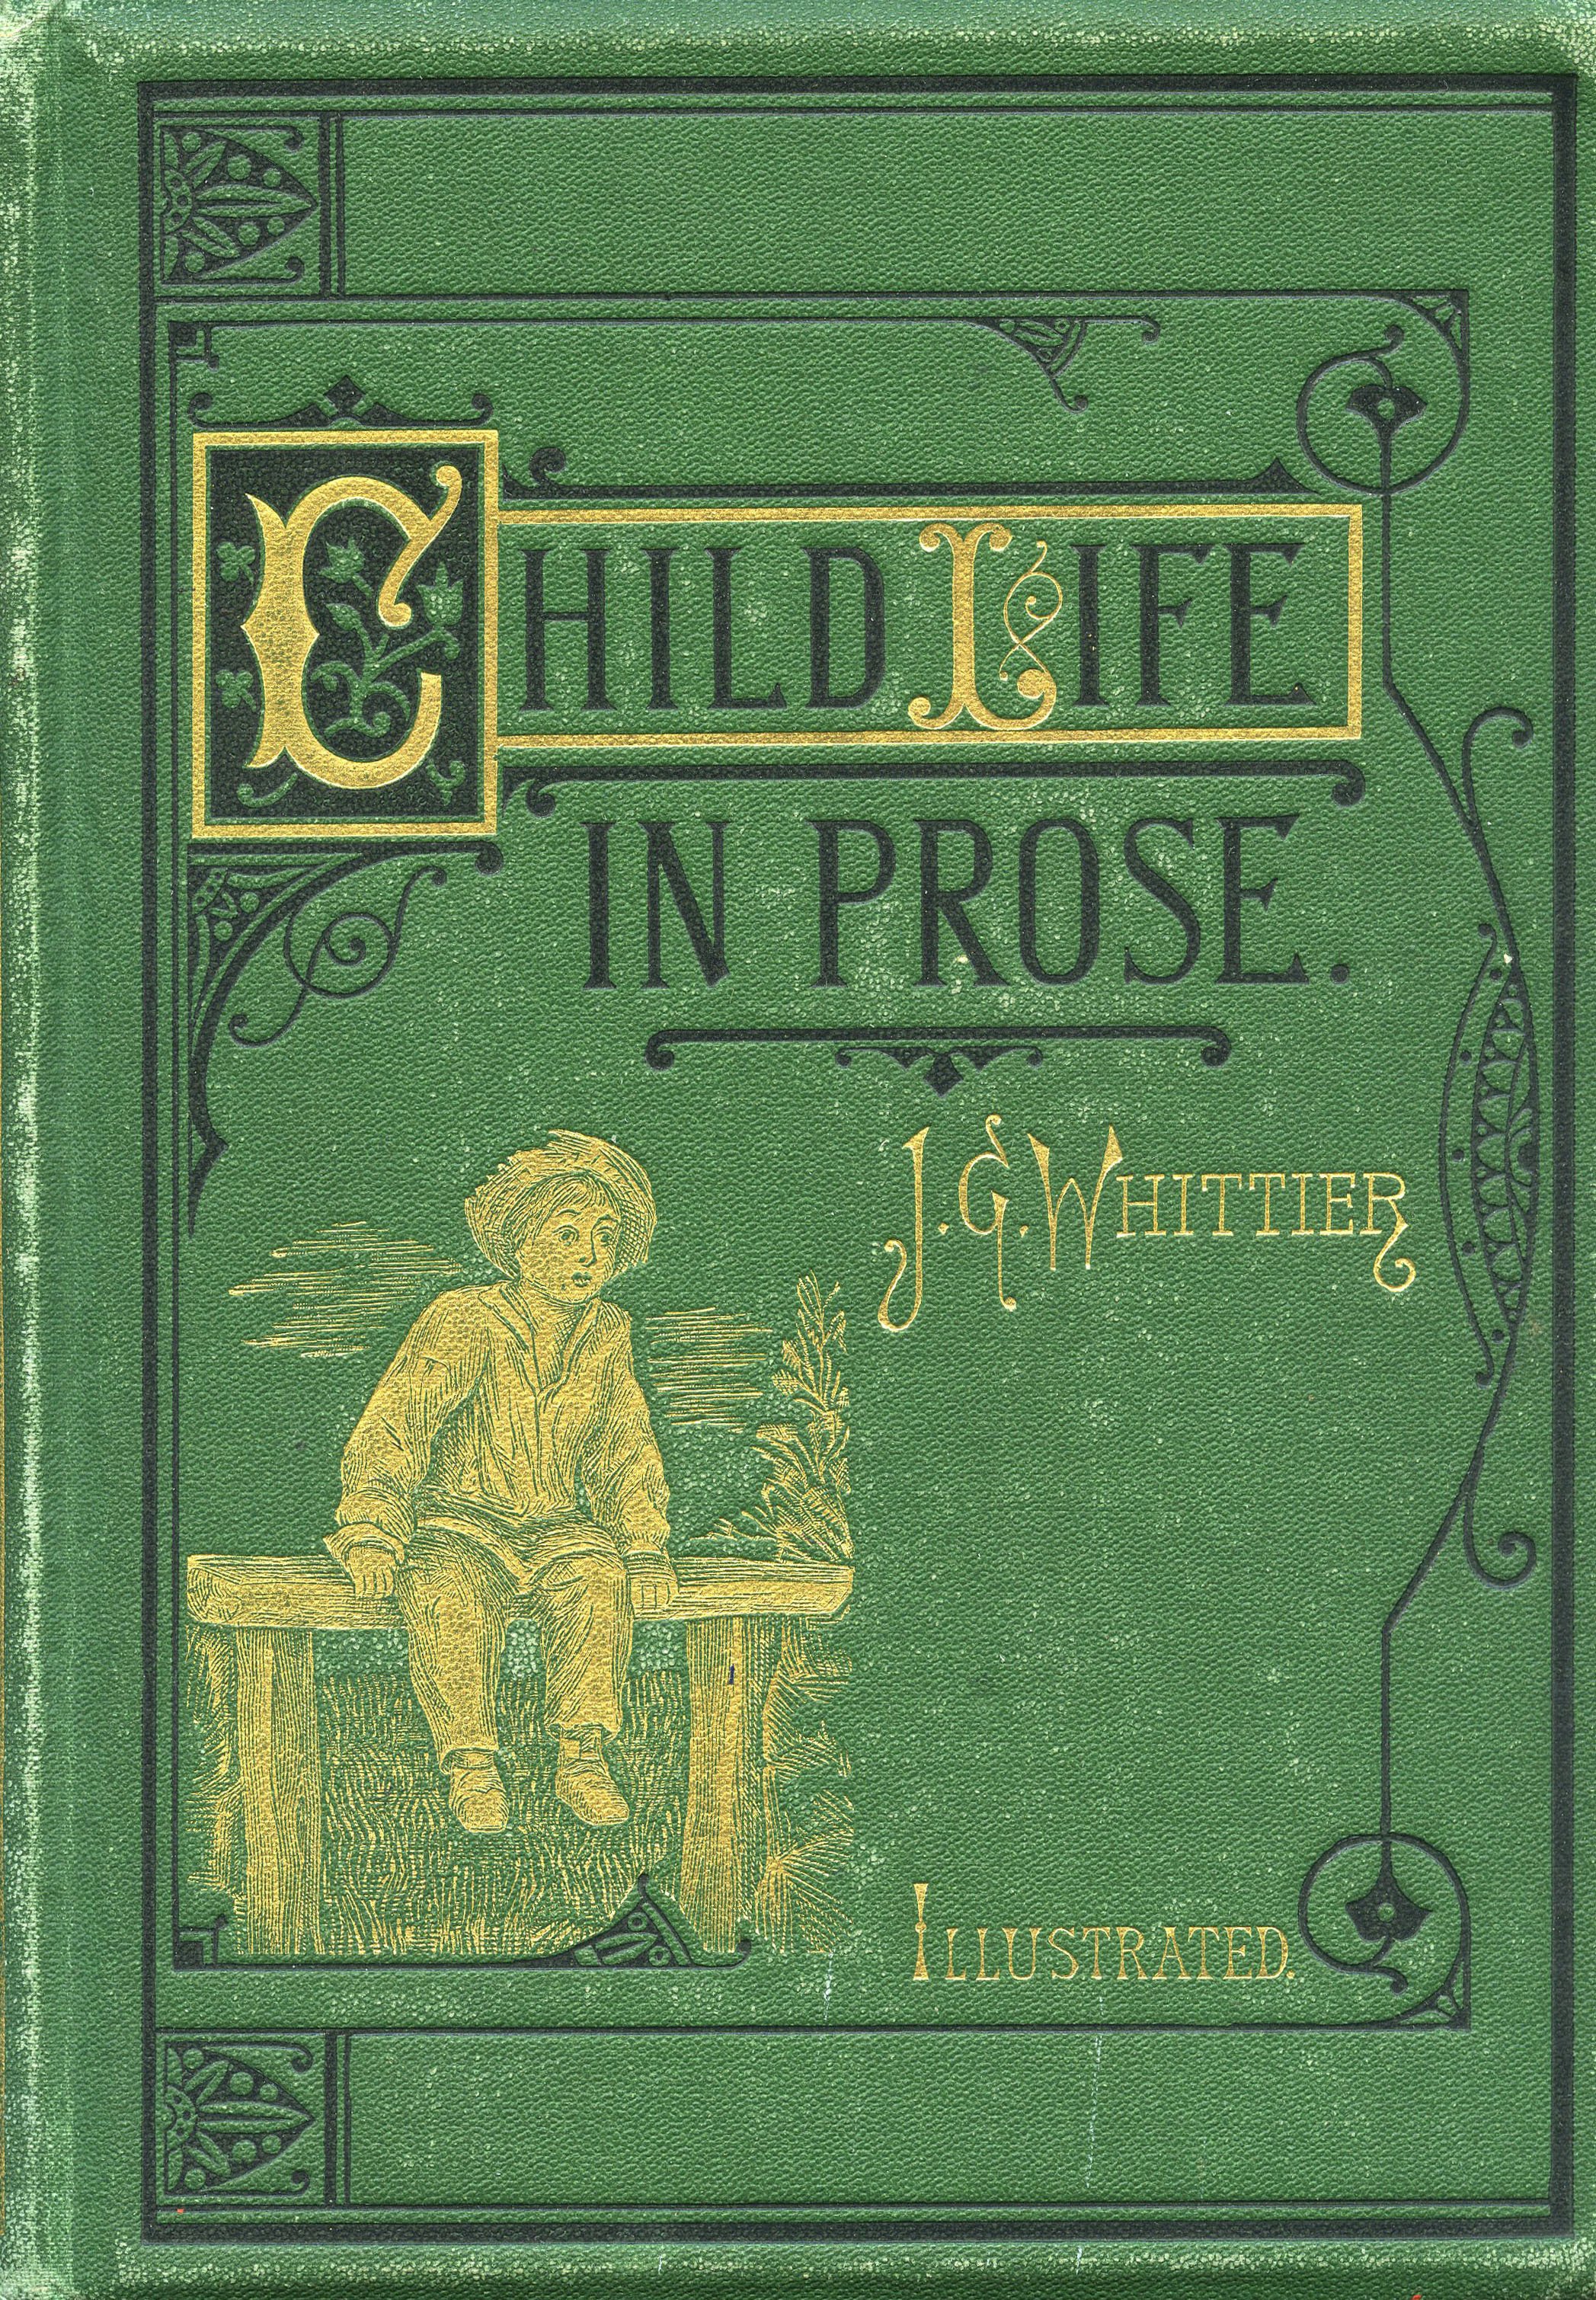 A Child's Life in Prose